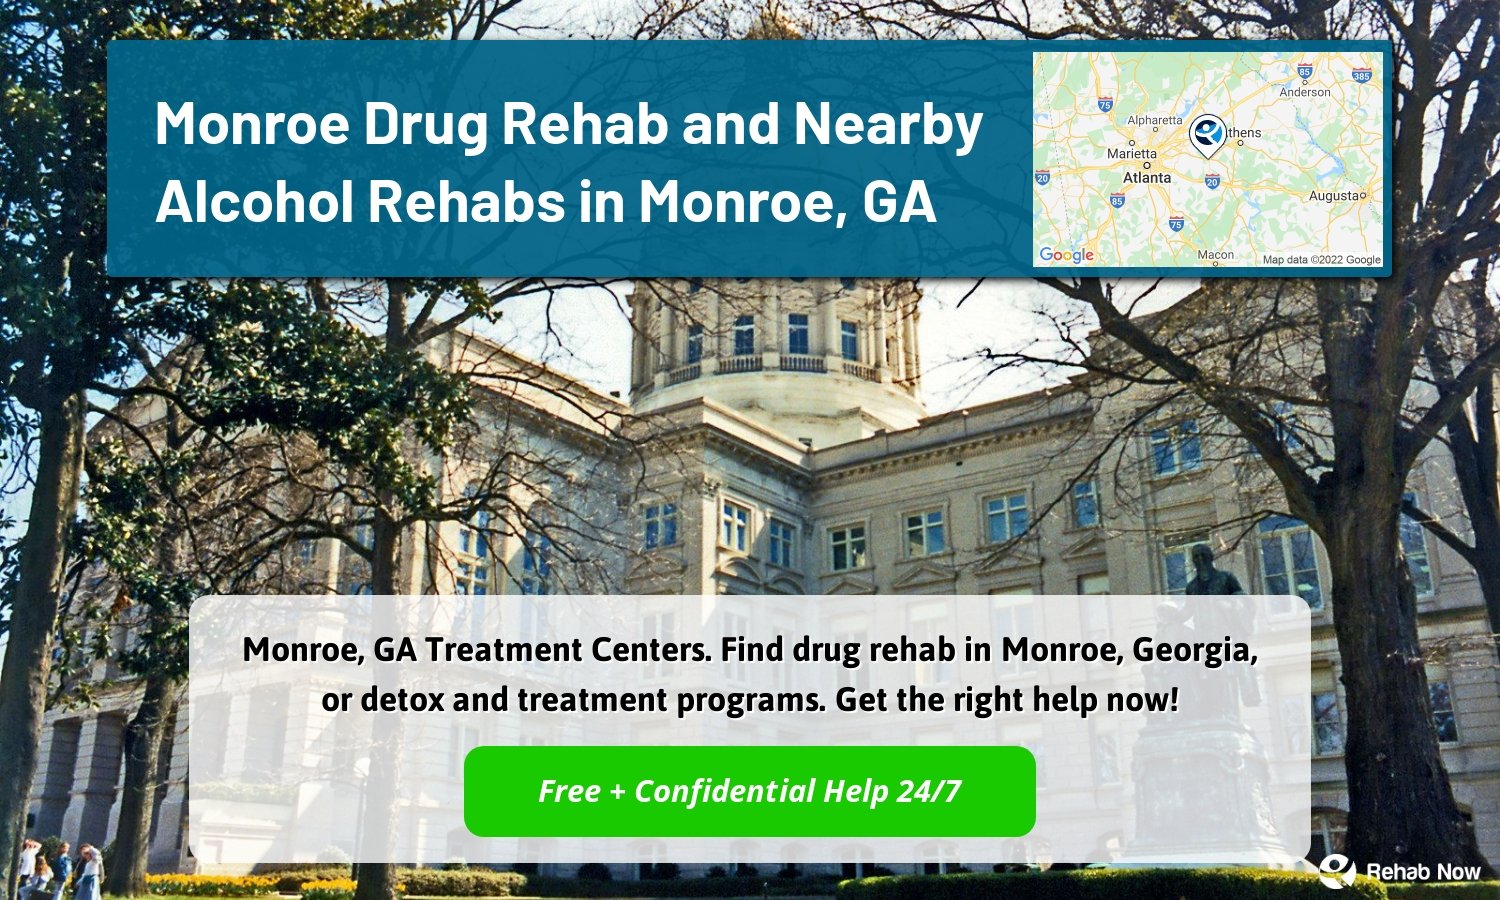 Monroe, GA Treatment Centers. Find drug rehab in Monroe, Georgia, or detox and treatment programs. Get the right help now!